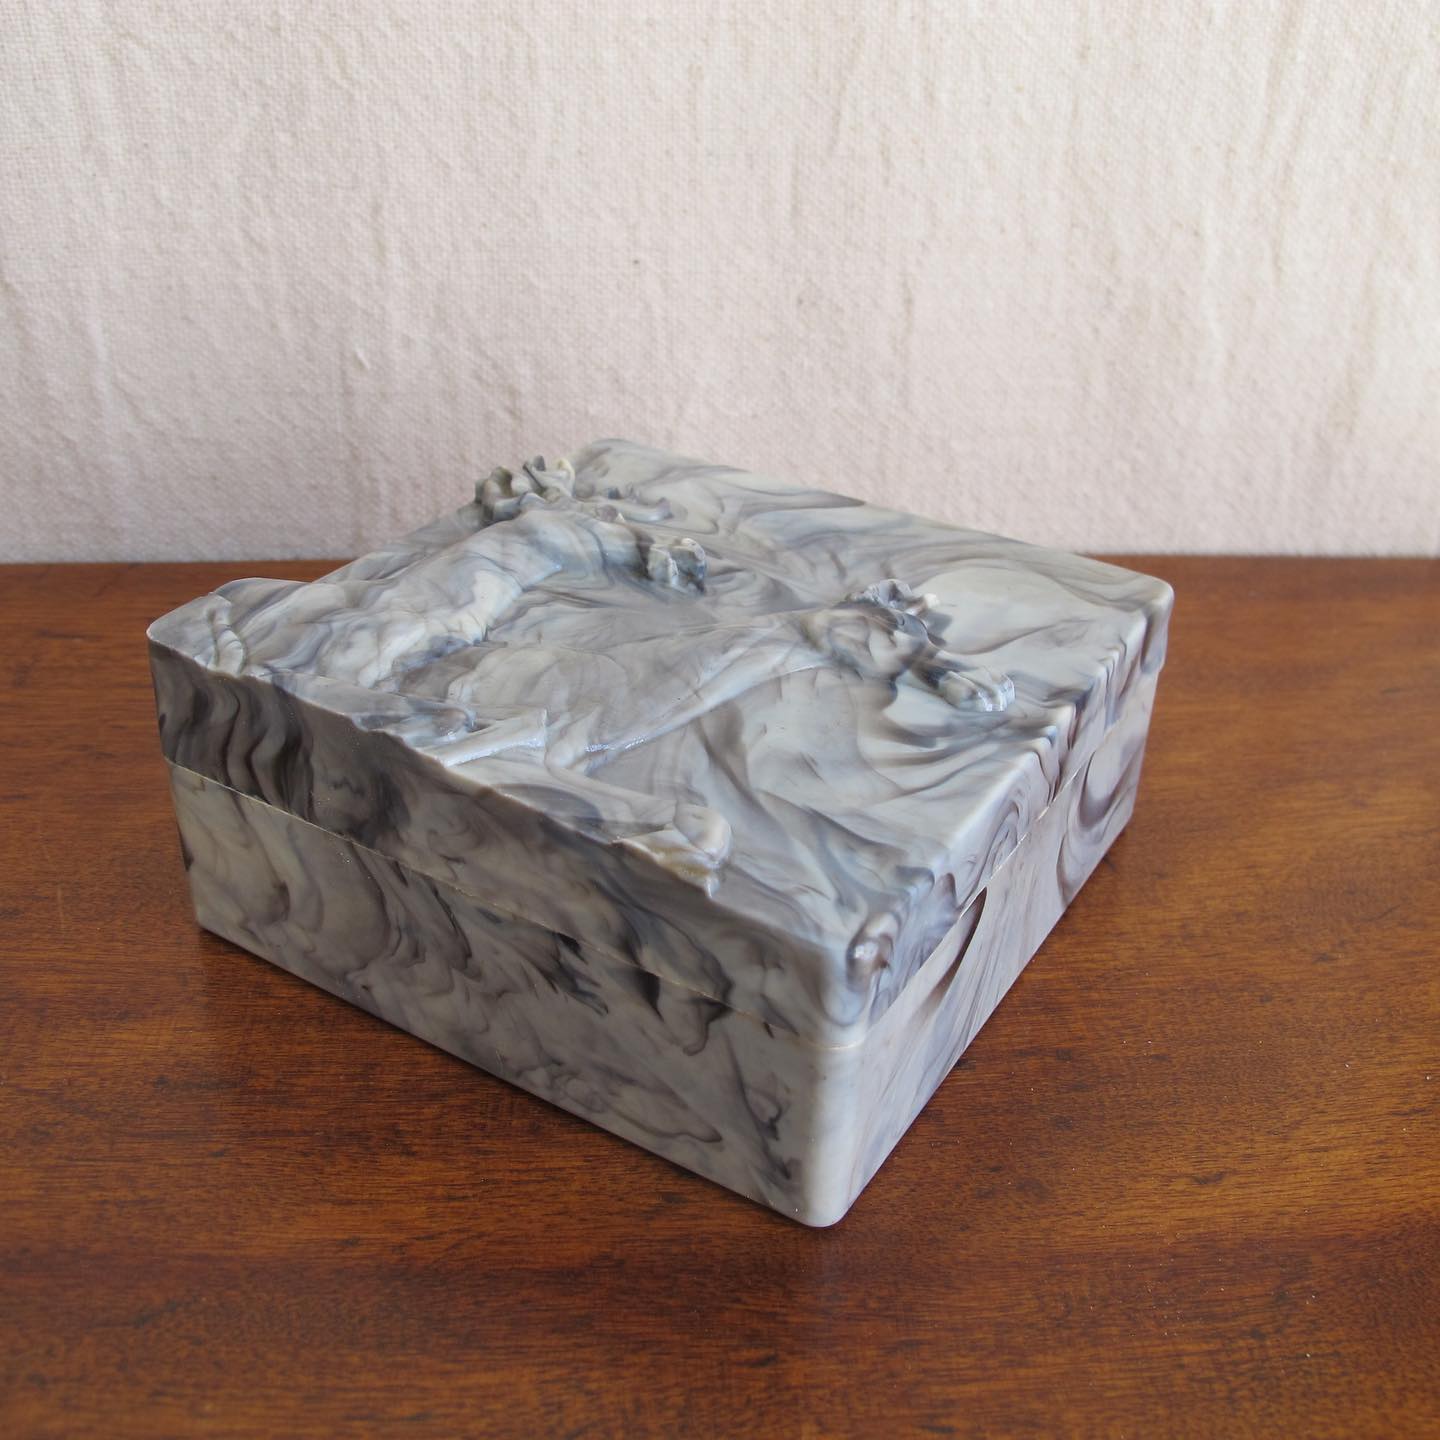 Early marbled celluloid box with relief of deer to the lid by Hickok, c. 1940s